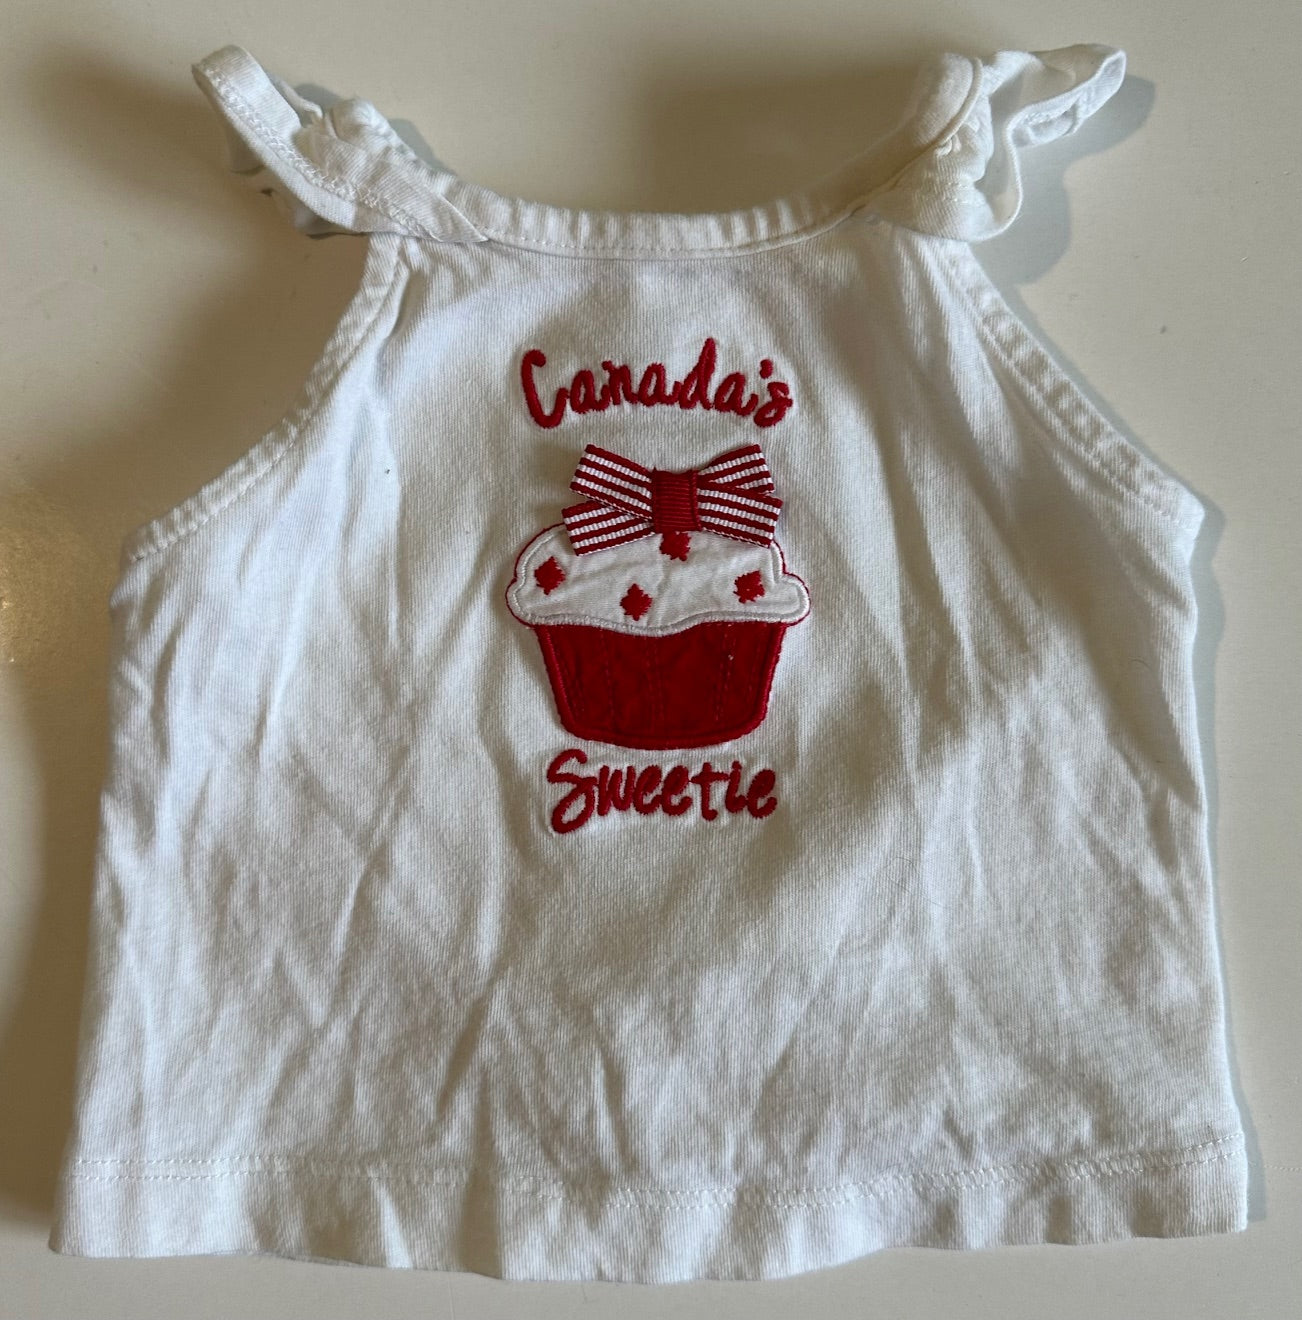 Gymboree, White and Red "Canada's Sweetie" Tank Top - 3-6 Months